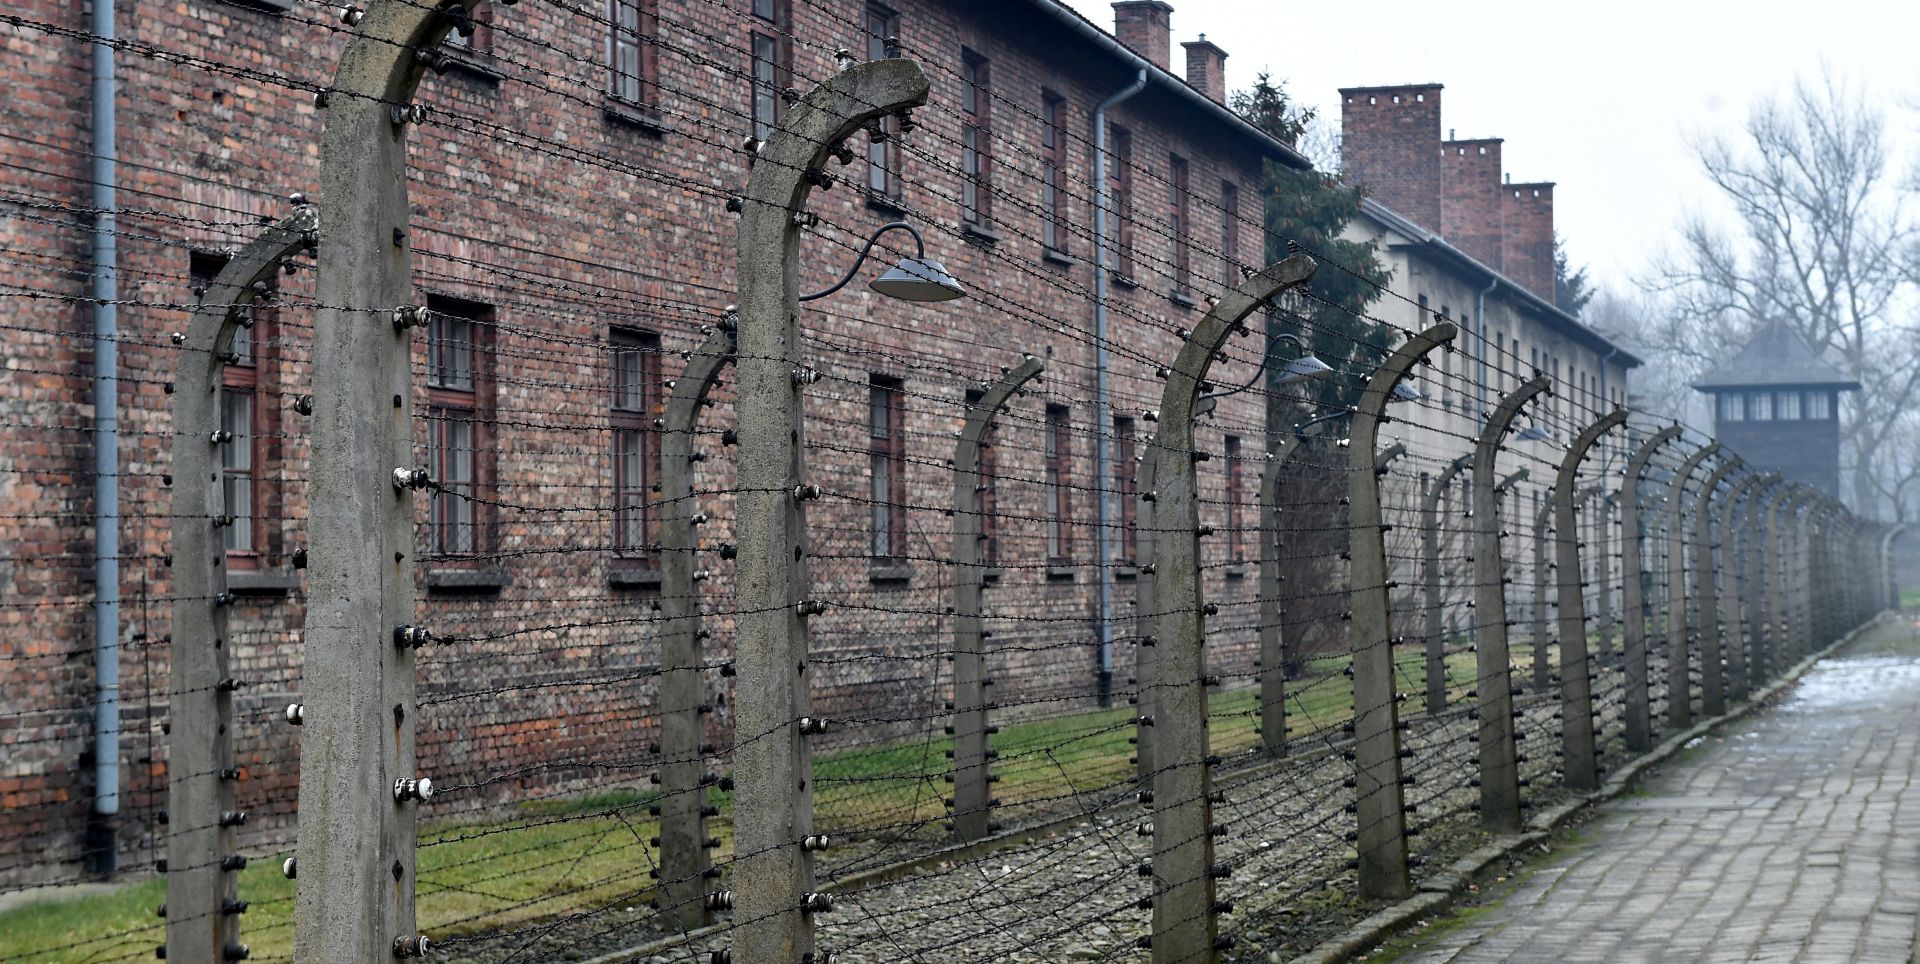 epa06478785 A view on the former Nazi-German concentration and death camp KL Auschwitz-Birkenau before ceremonies marking the the 73rd anniversary of the liberation of the camp, in Oswiecim, Poland, 27 January 2018. The biggest German Nazi death camp KL Auschwitz-Birkenau was liberated by the Soviet Red Army on 27 January 1945. Today world commemorates International Holocaust Remembrance Day.  EPA/JACEK BEDNARCZYK POLAND OUT